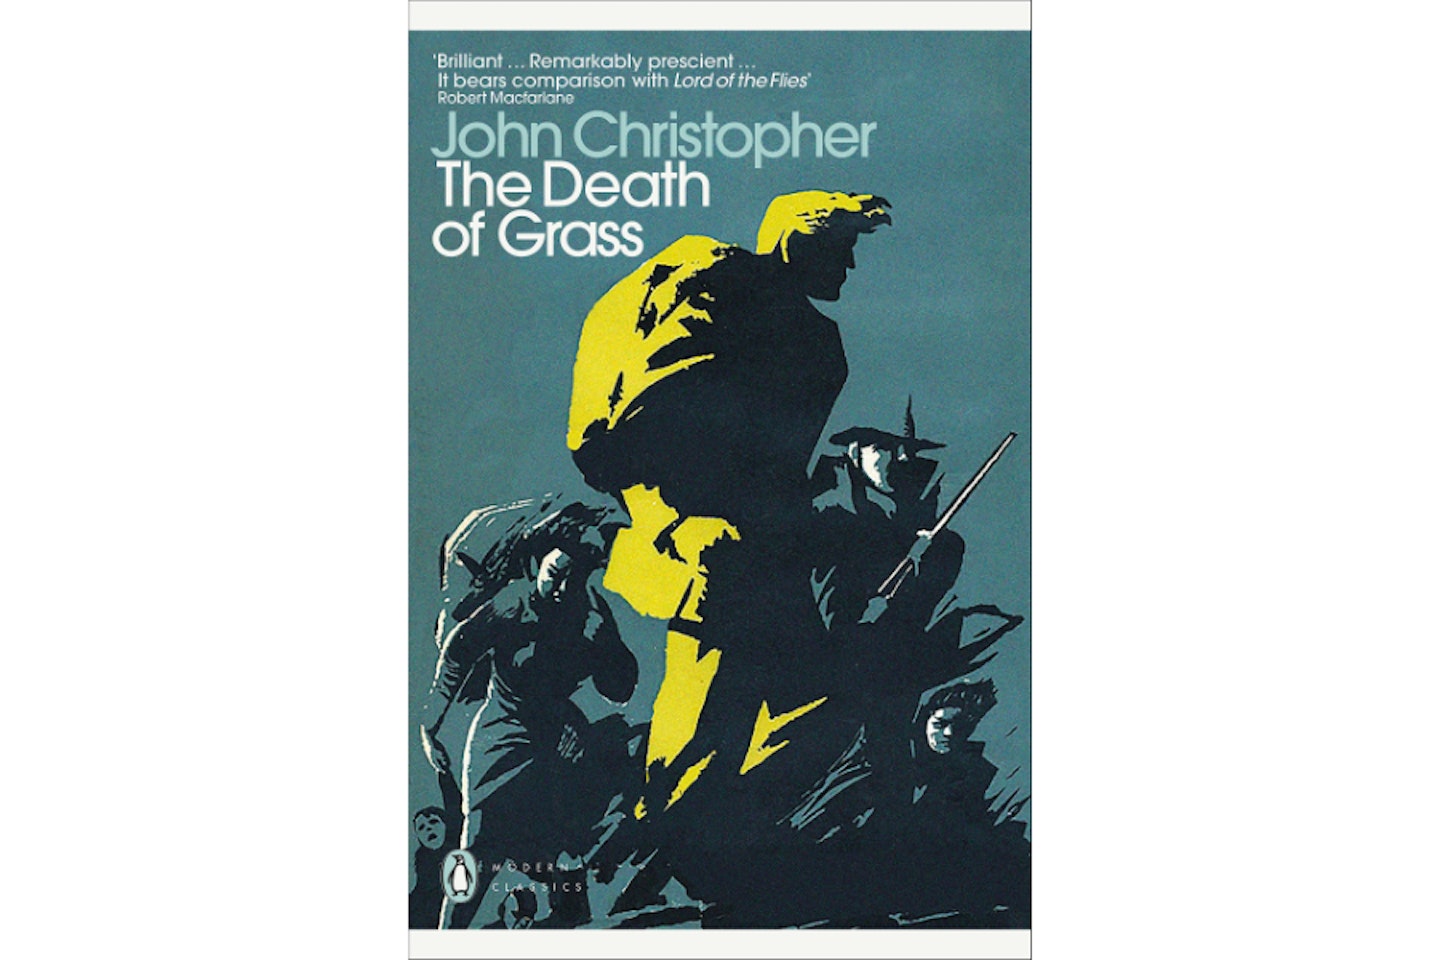 The Death Of Grass by John Christopher, 1956